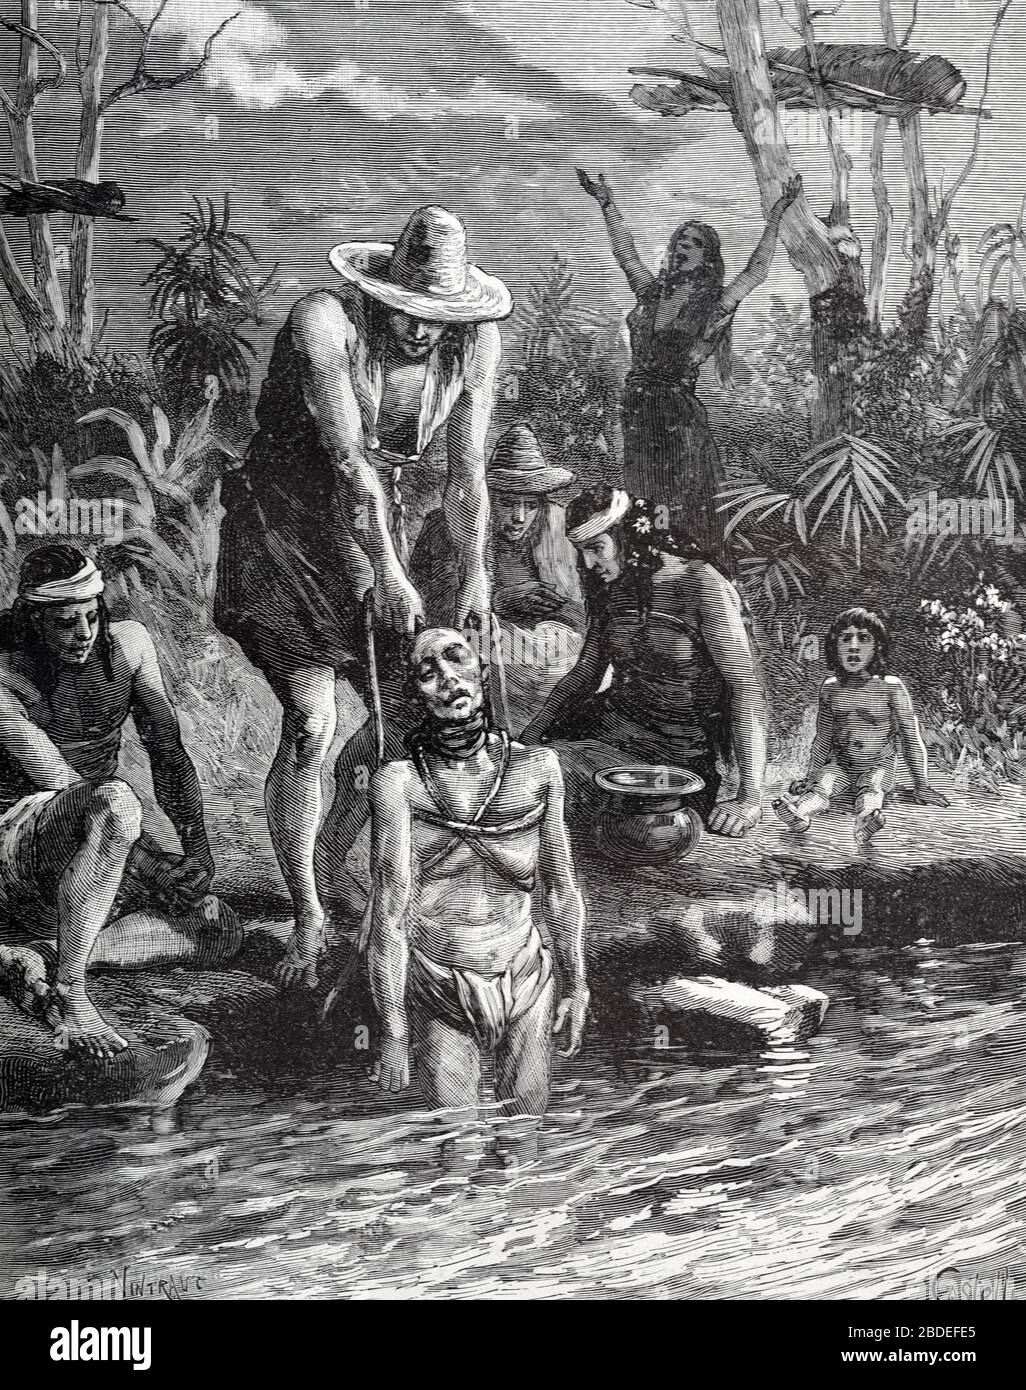 Death Ritual as Corpse is Dipped in River where the Flesh is Eaten by Predatory Fish or Piranhas before the Deceased is Given a Sky Burial in a Burial Tree among the Caribs, Kalina, Amerindians or Indigenous People of Venezuela. Vintage or Old Illustration or Engraving 1887 Stock Photo